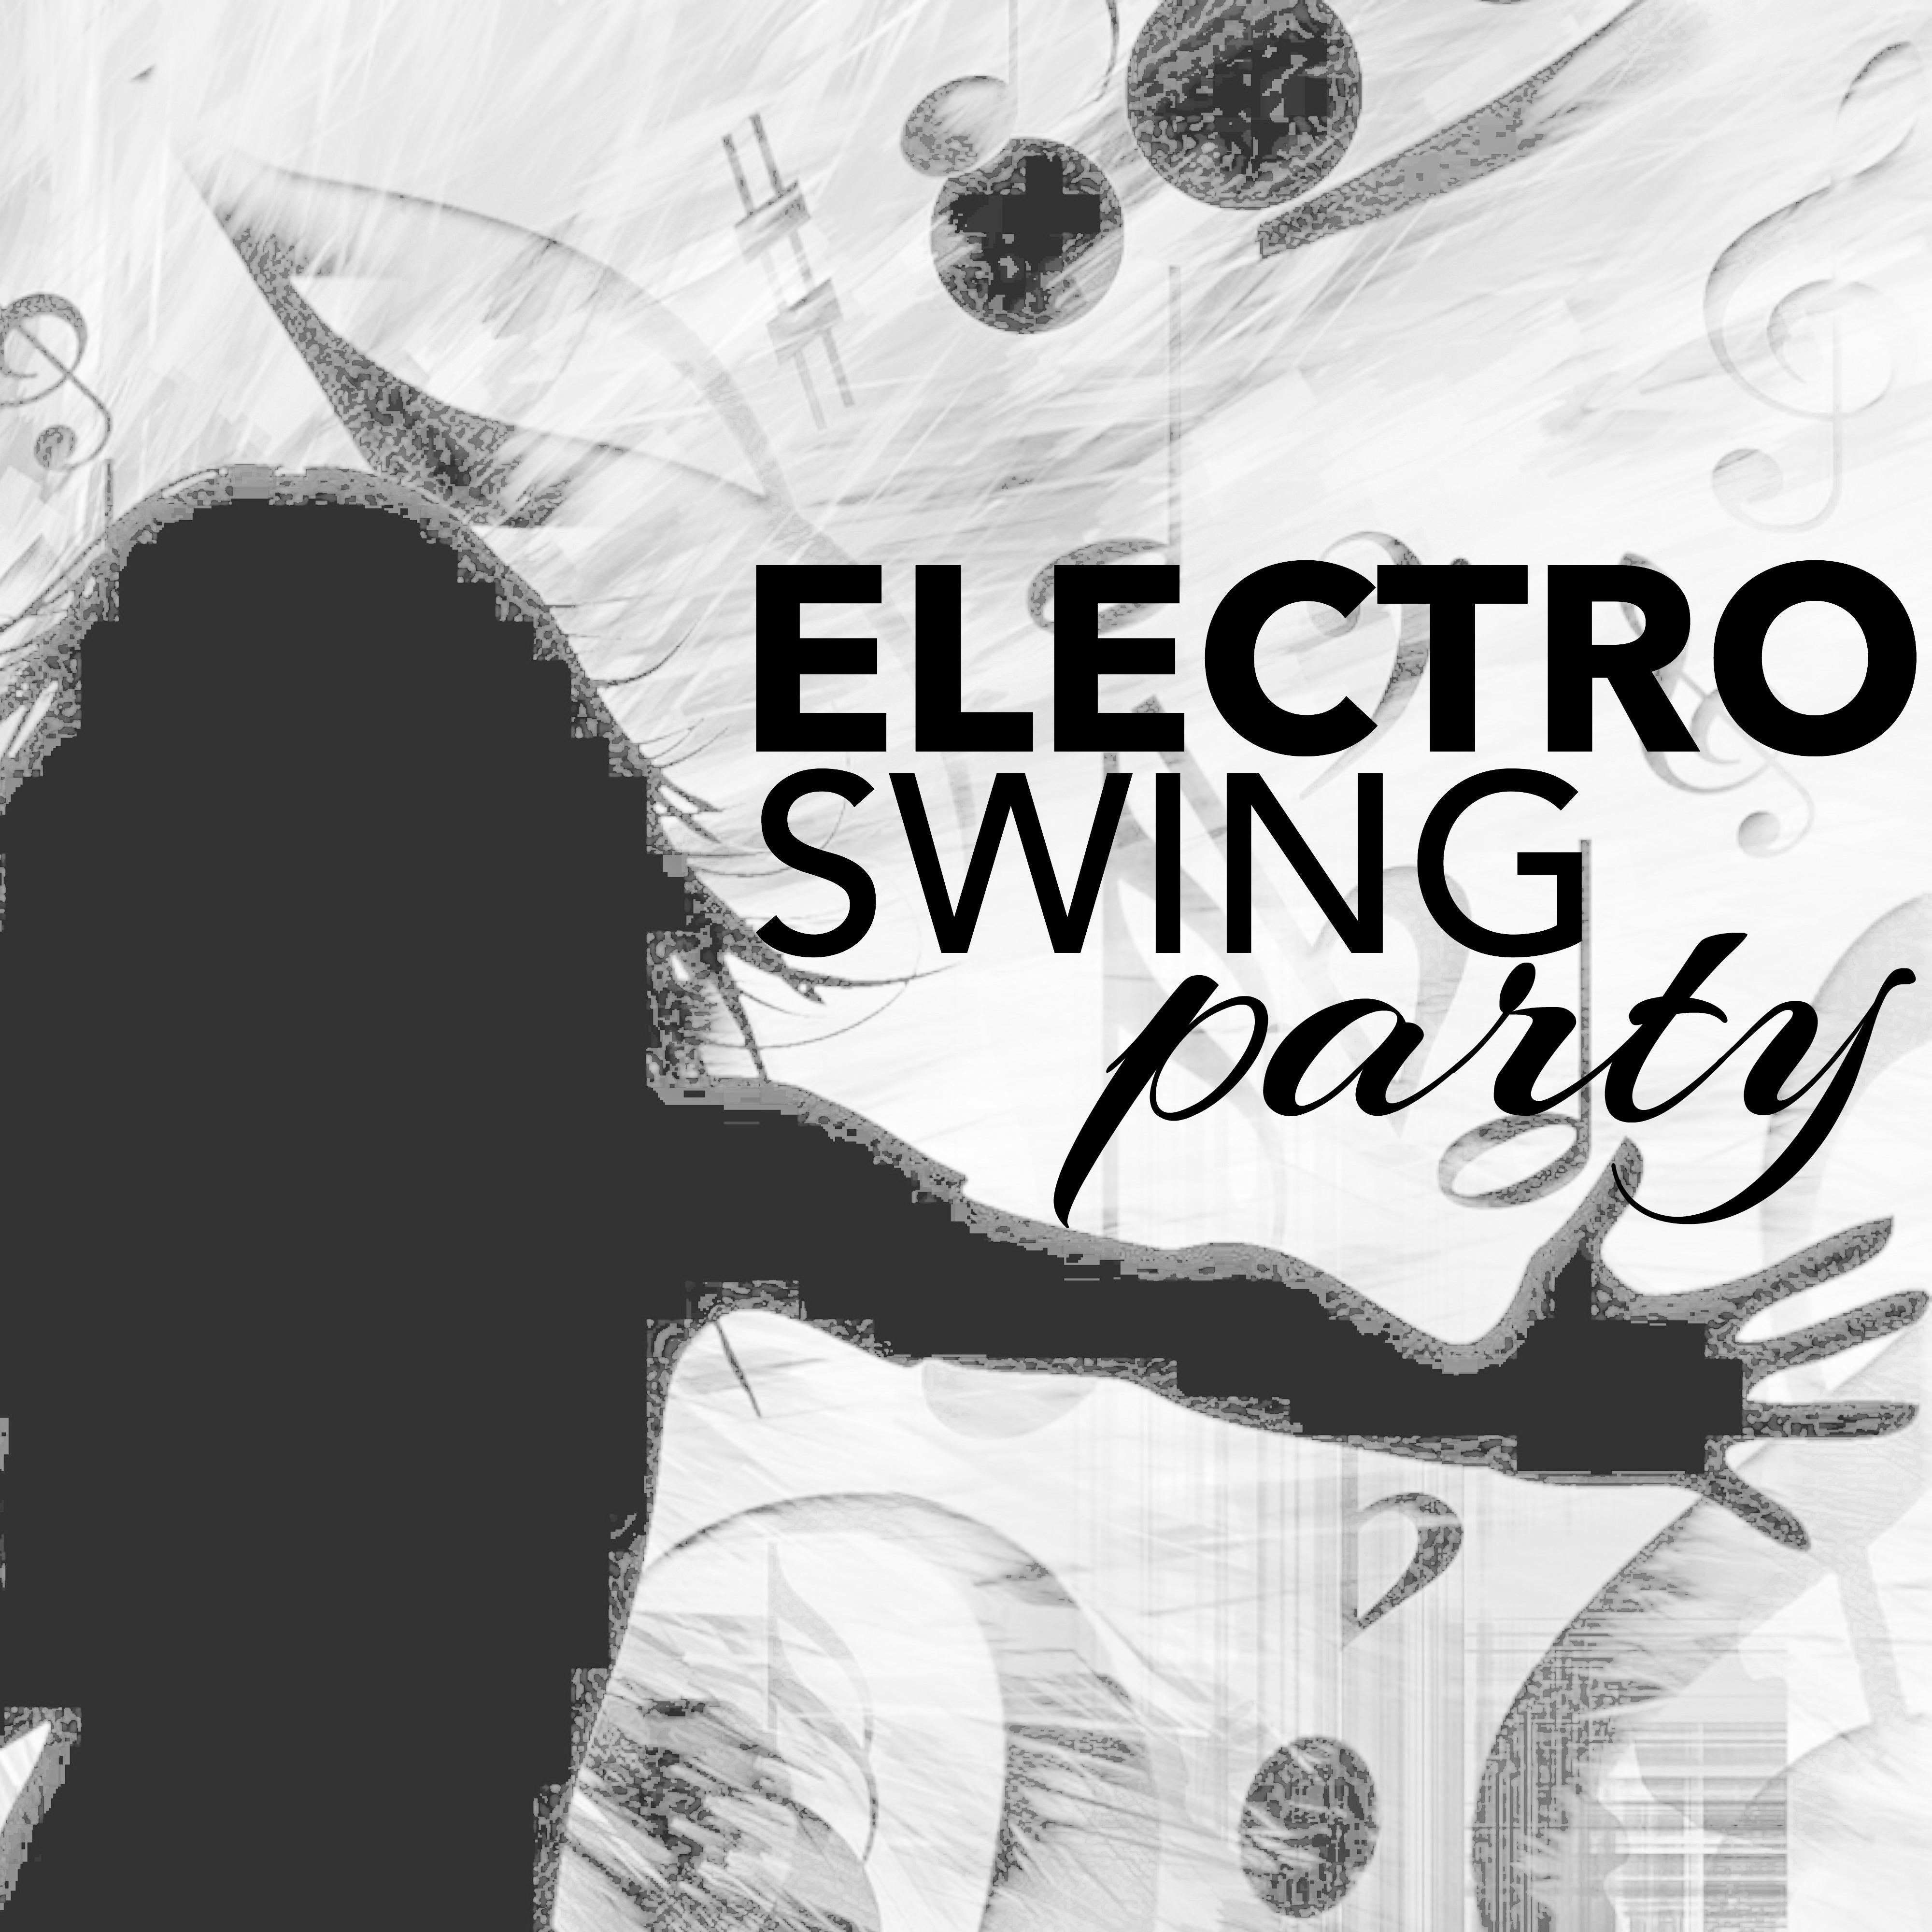 Electro Swing Party  Jazz Party Night to Celebrate the Roaring 20' s, Charleston  Jazz for Dancing